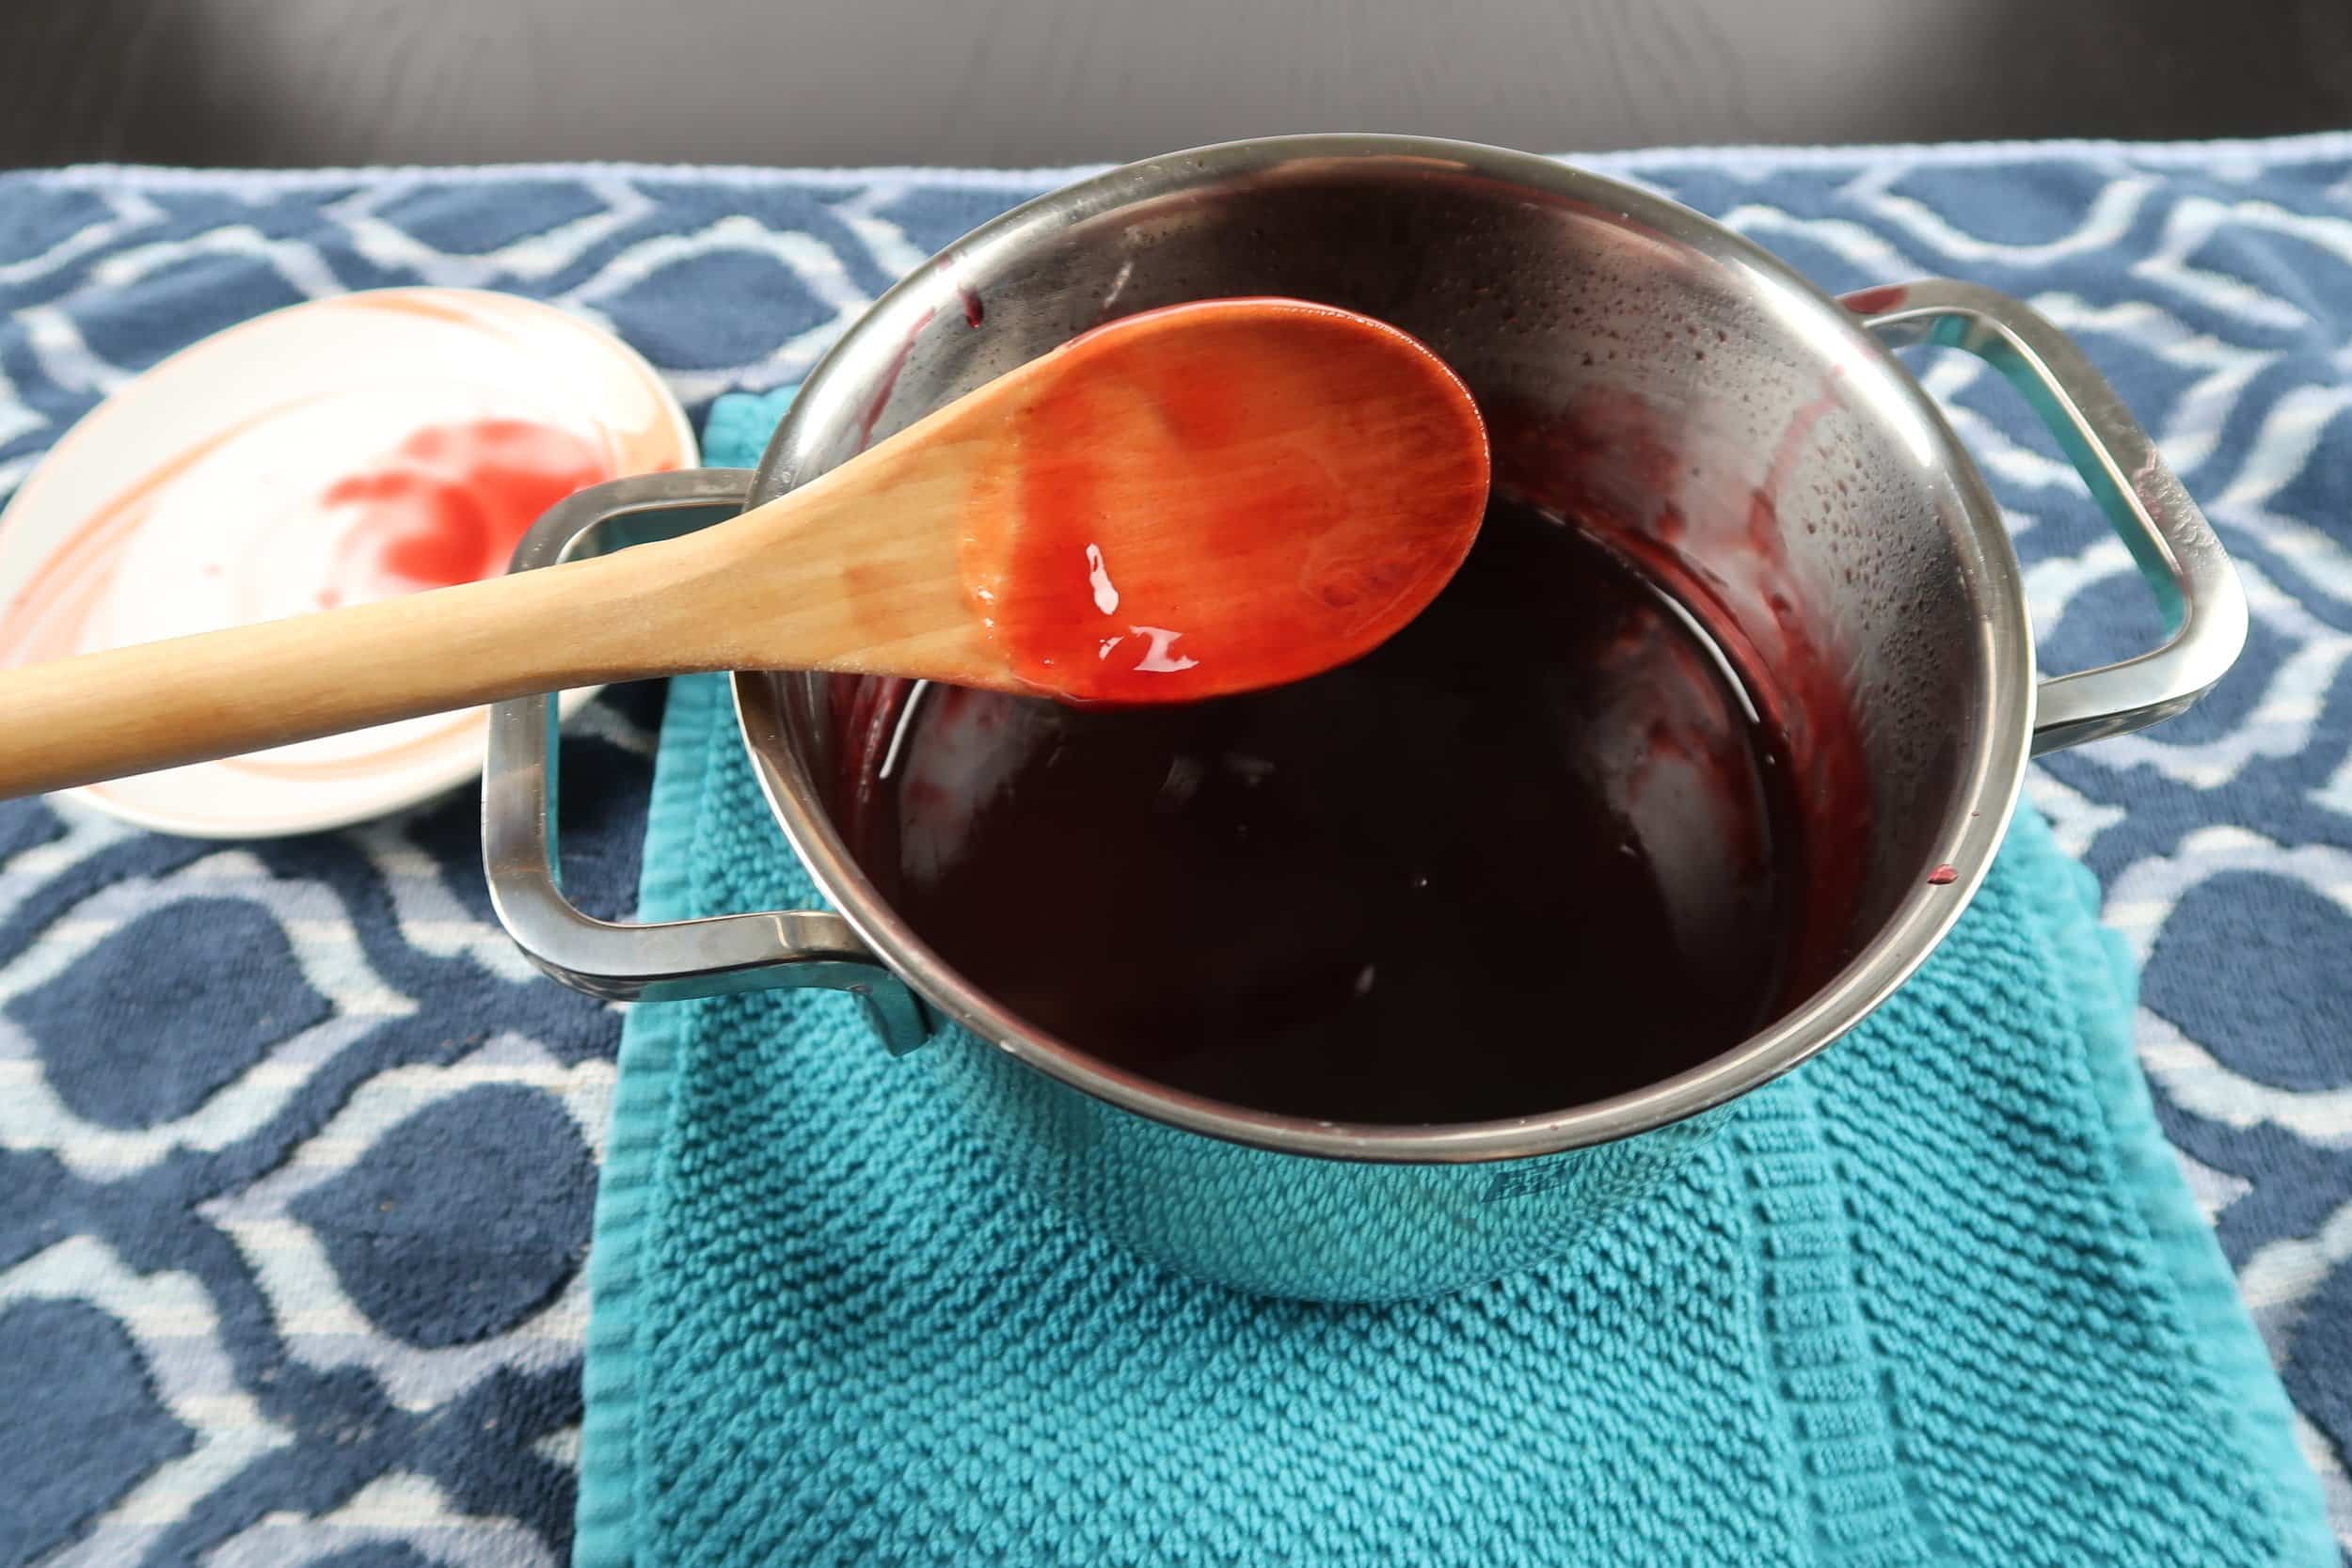 A pot of bright red pomegranate sauce.